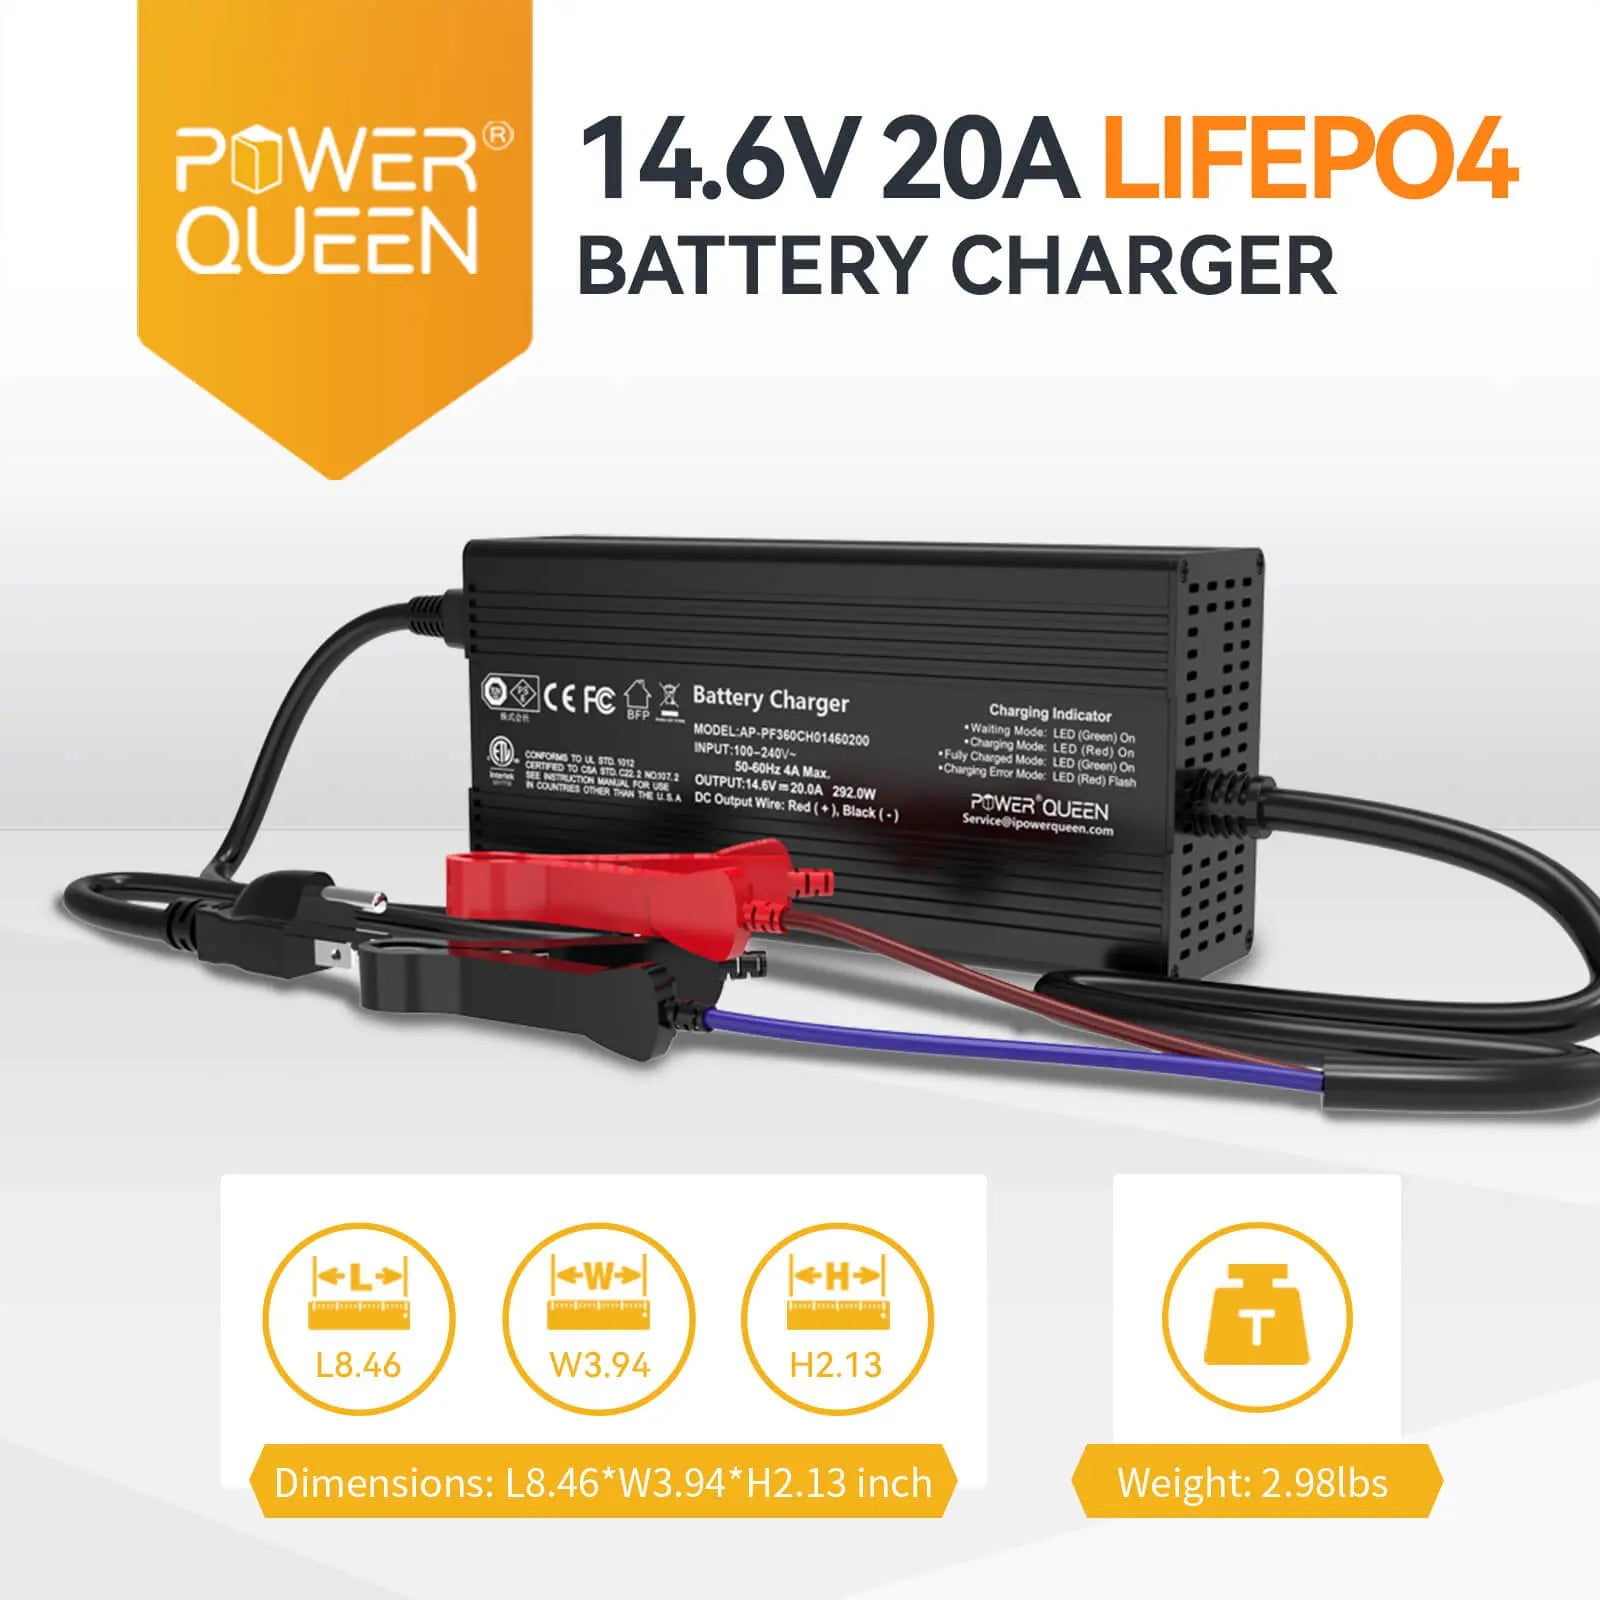 Power Queen 14.6V 20A LiFePO4 Battery Charger freeshipping